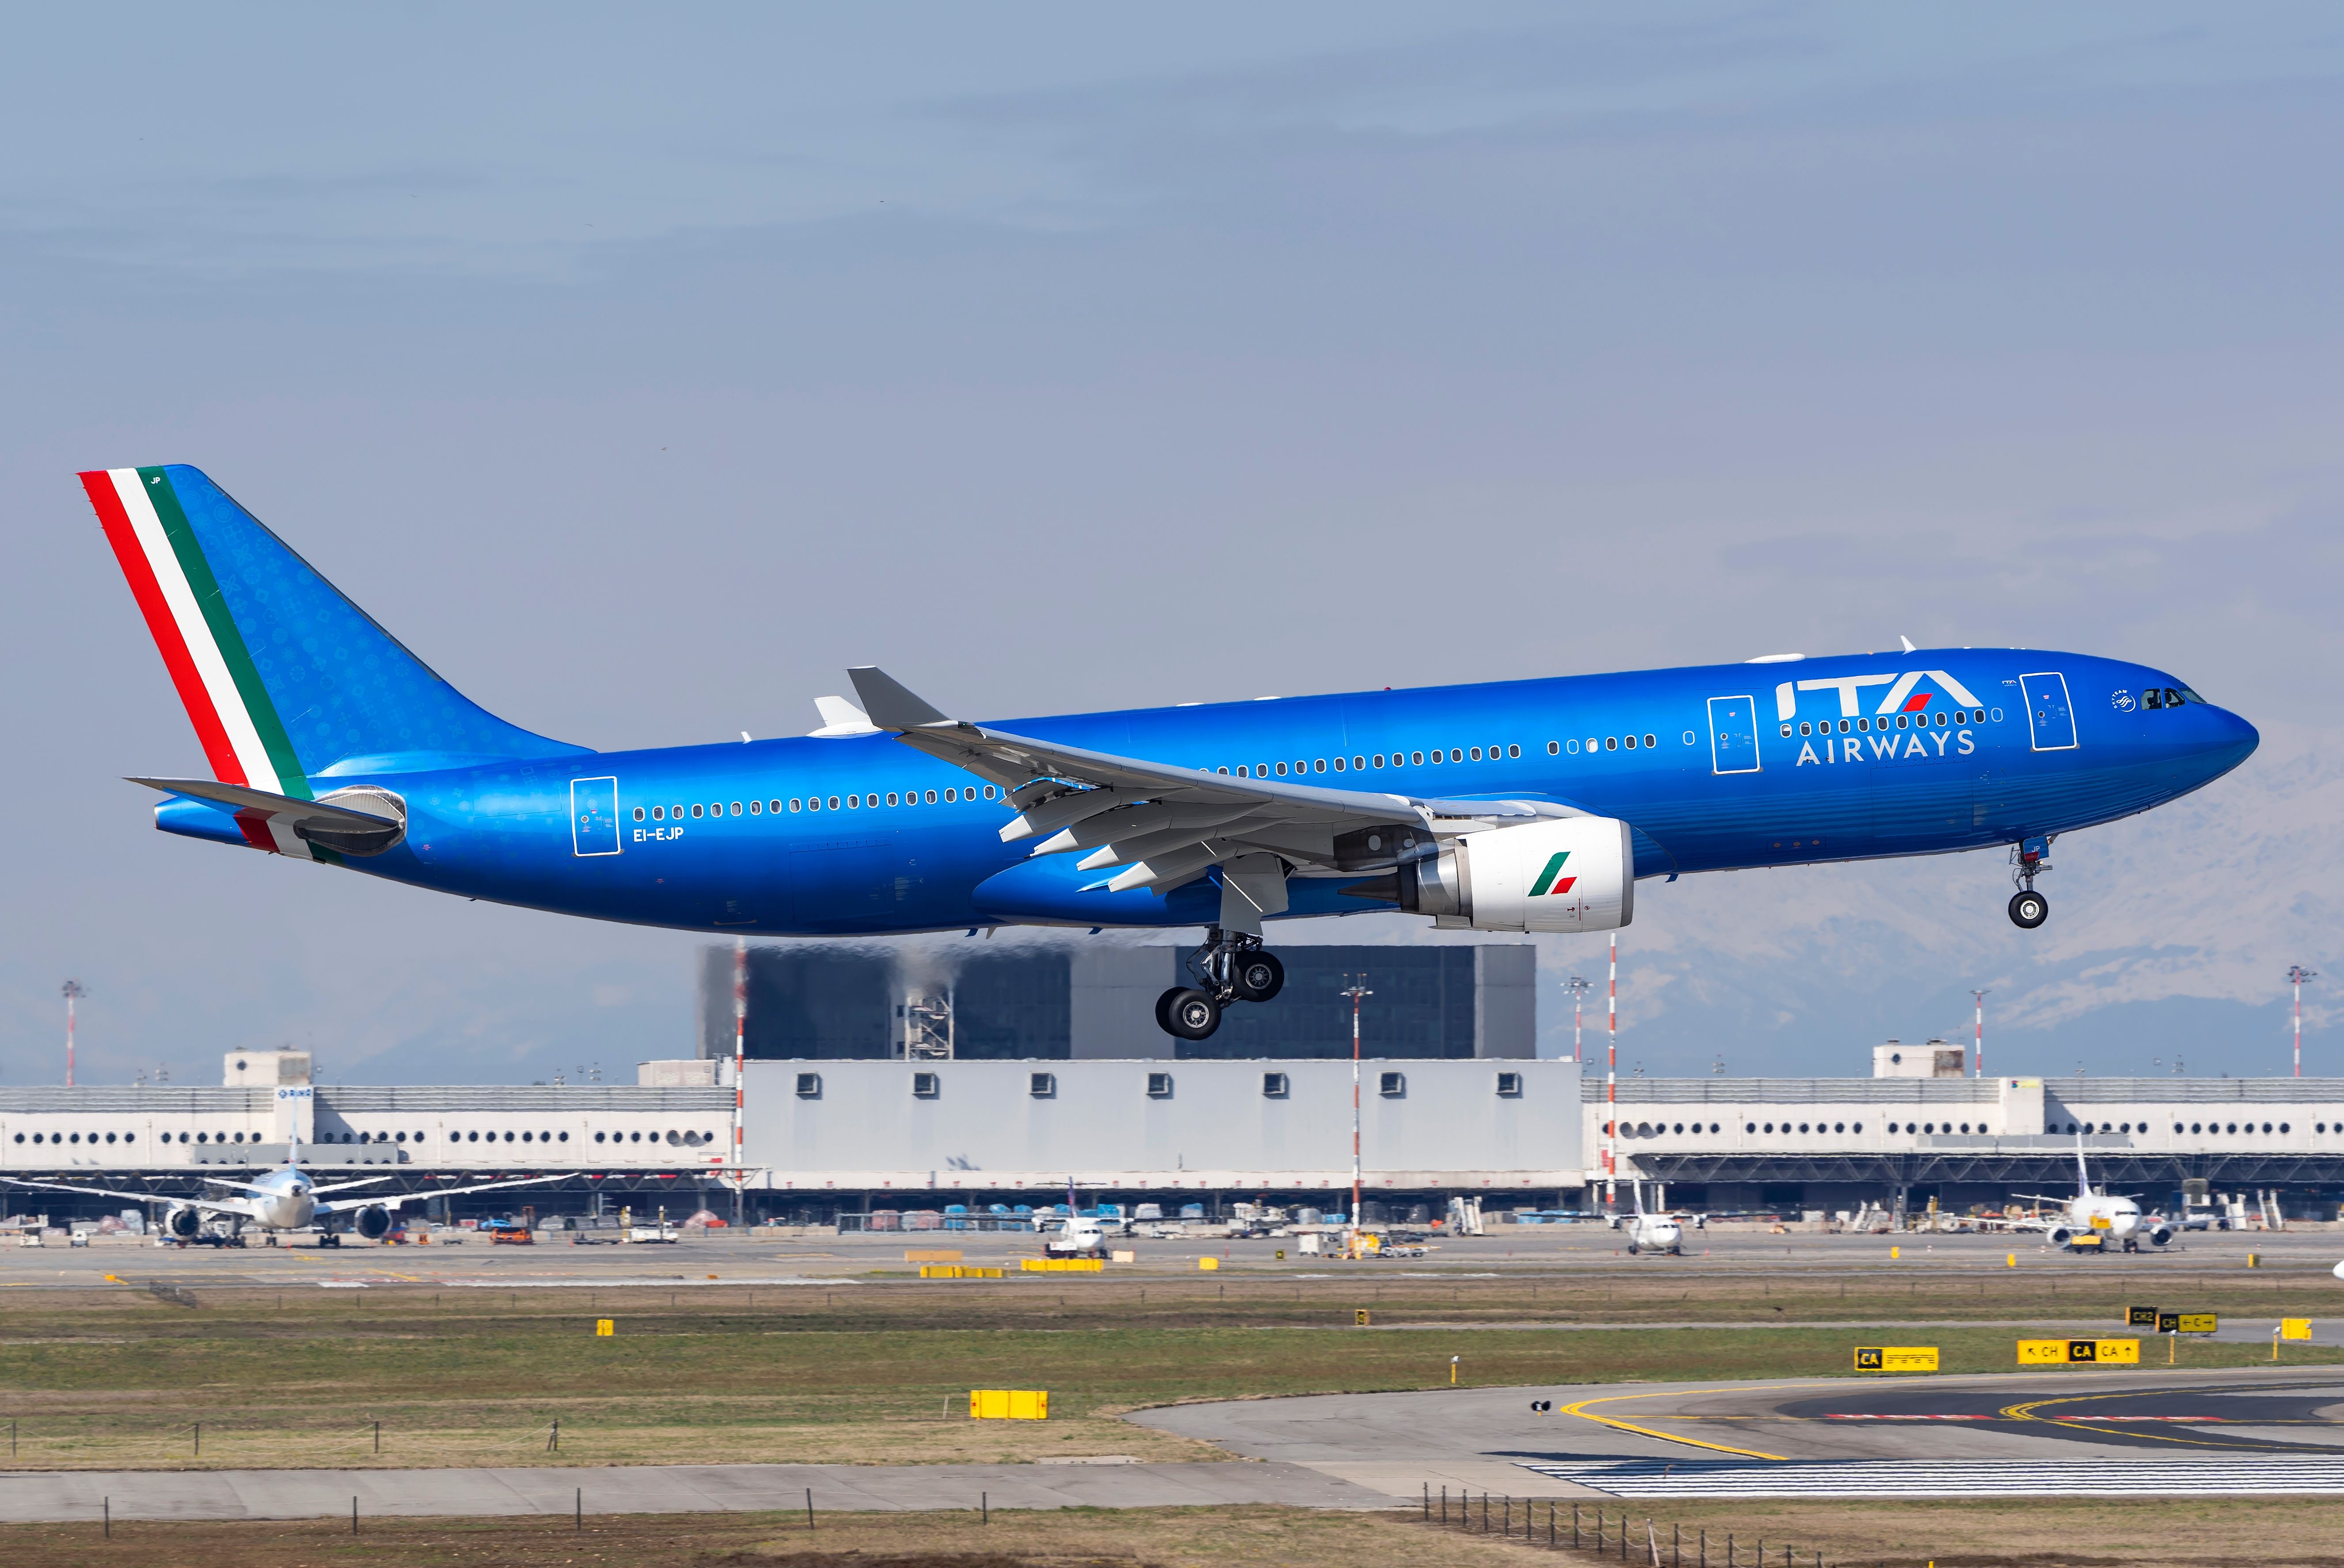 An ITA Airways Airbus A330-200 taking off with an airport in the background.